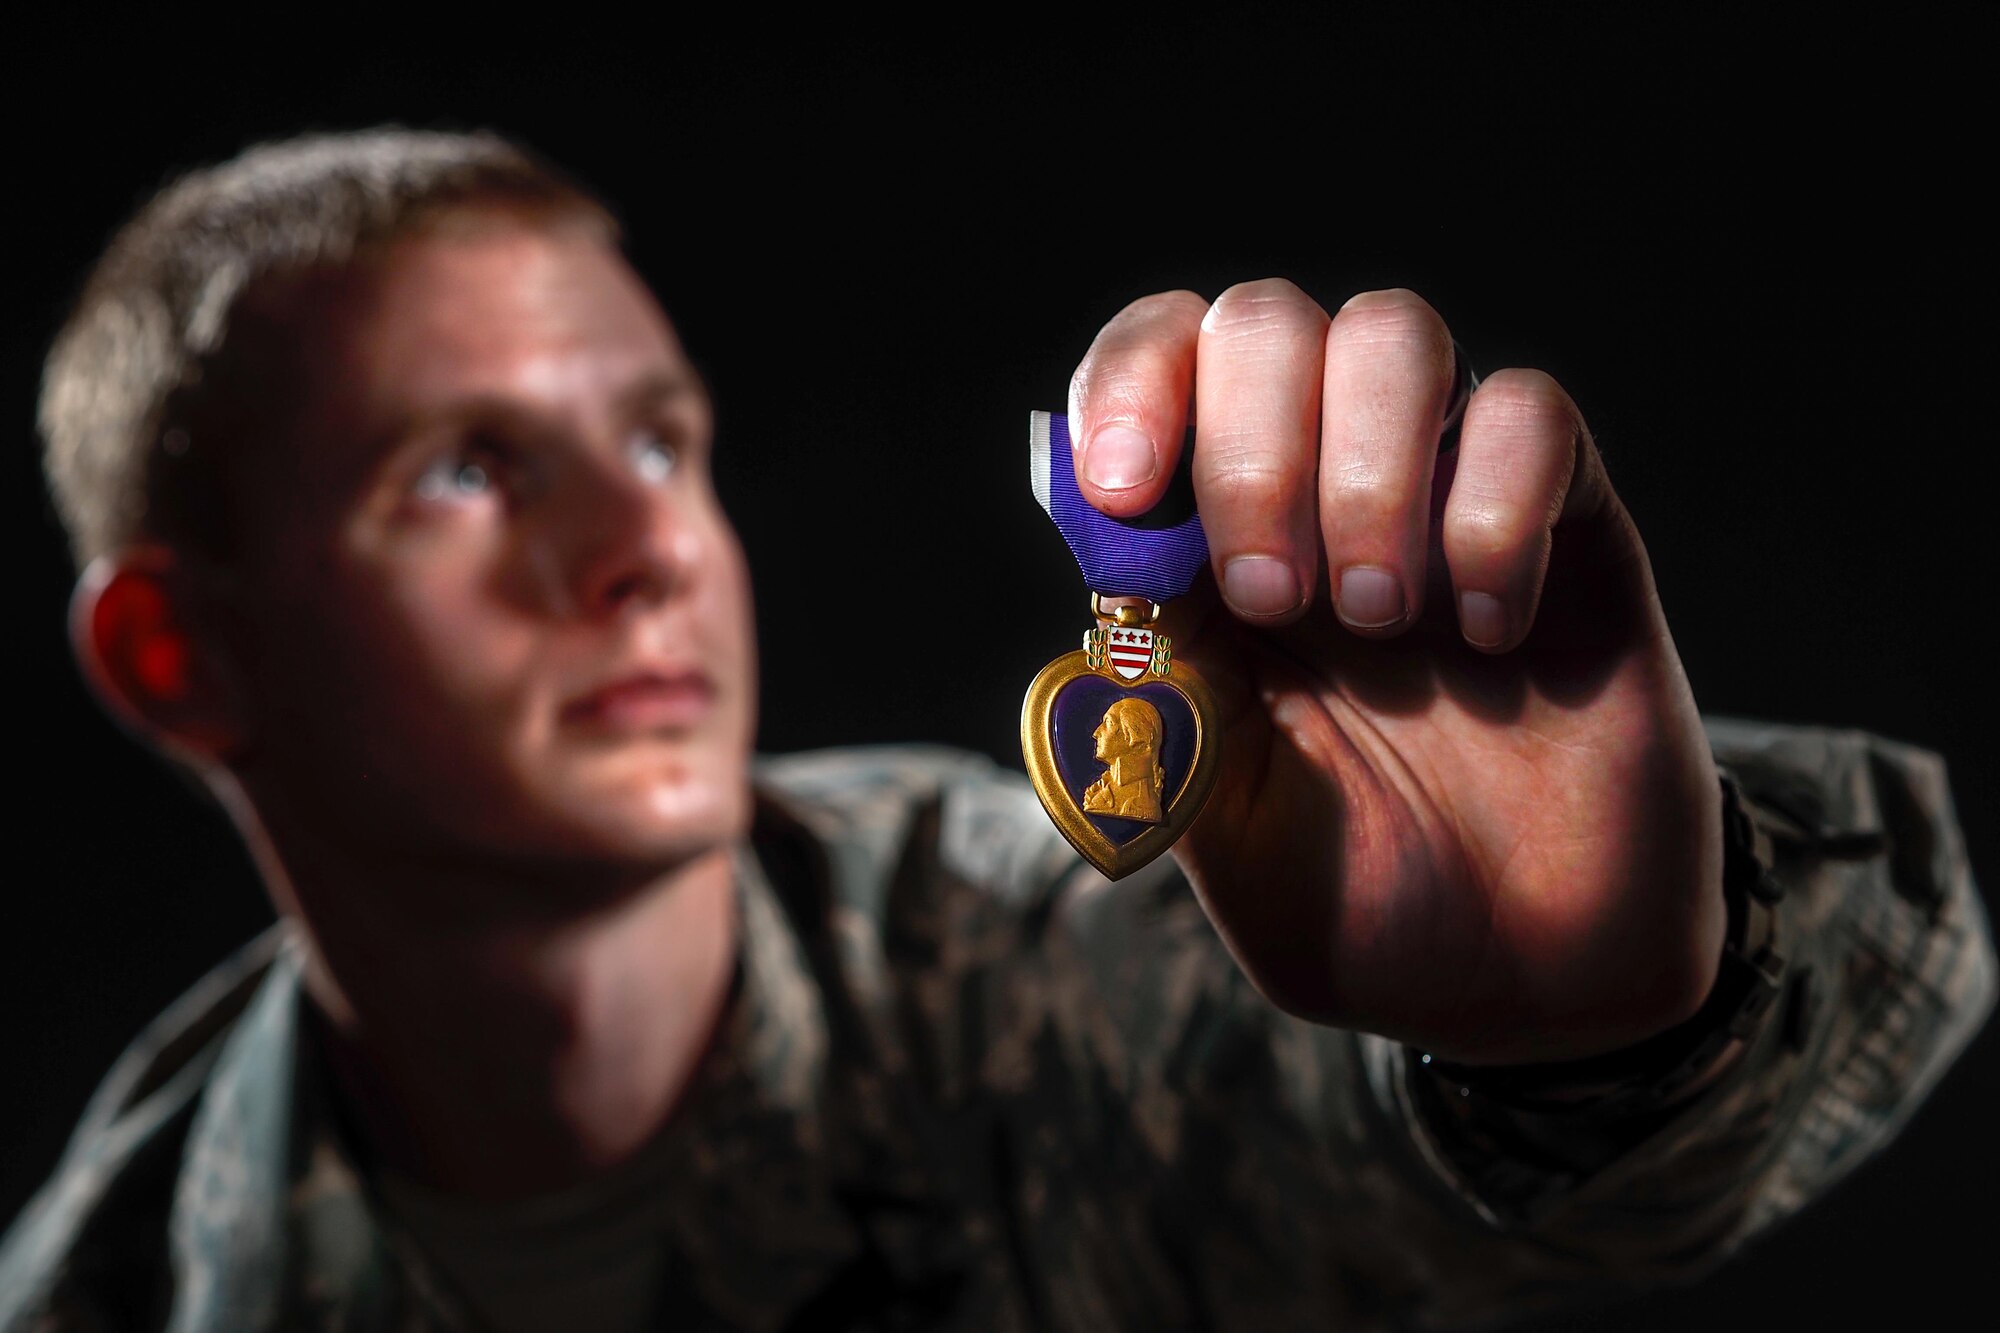 Air Force Staff Sgt. Christopher Wiedmer, a vehicle operator assigned to the 773d Logistics Readiness Squadron at Joint Base Elmendorf-Richardson, Alaska, poses for a portrait, Wednesday, Oct. 5, 2016.  Wiedmer received the Purple Heart after he was wounded by an improvised explosive device, and suffered a traumatic brain injury and severe burns, in Iraq during his 2011 deployment in support of Operation New Dawn while serving as a lead vehicle commander with the 424th Medium Truck Detachment. Wiedmer stresses how important resiliency was to his recovery, and finds fulfillment in mentoring young Airmen saying he strives to live up to the noncommissioned officer standards he was shown as a junior Airman. 